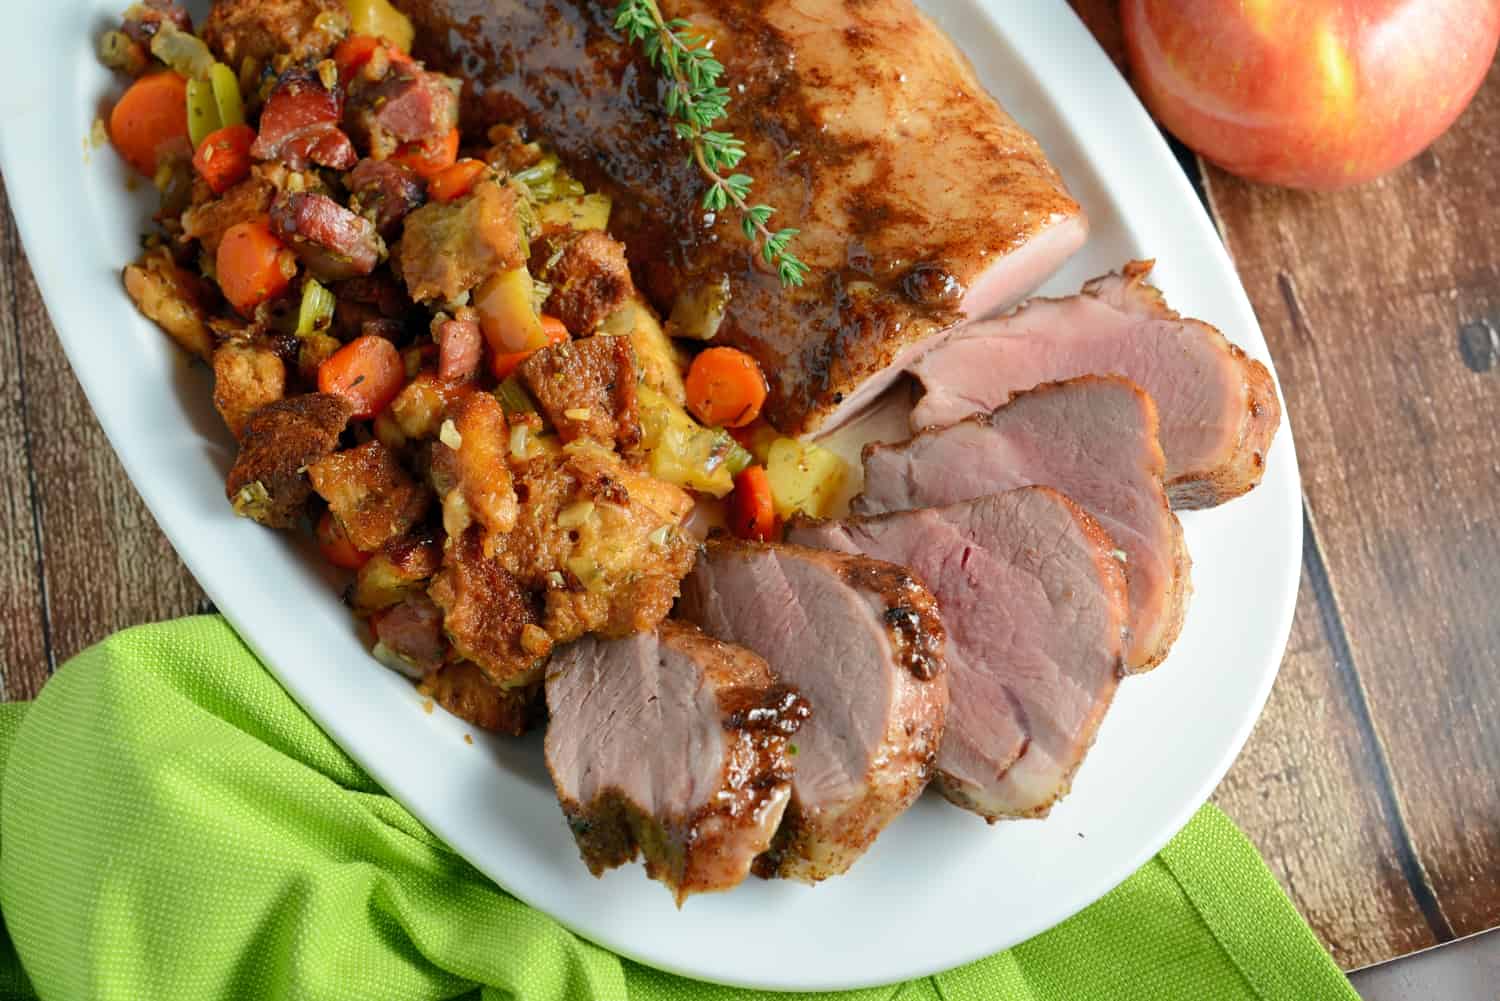 Apple Spiced Pork Tenderloin with Stuffing- one of the best pork recipes out there! This pork tenderloin recipe will blow you away with aromatic spices and an apple jelly glaze, surrounding with fresh apple and ham stuffing, all cooked on the same baking sheet. www.savoryexperiments.com